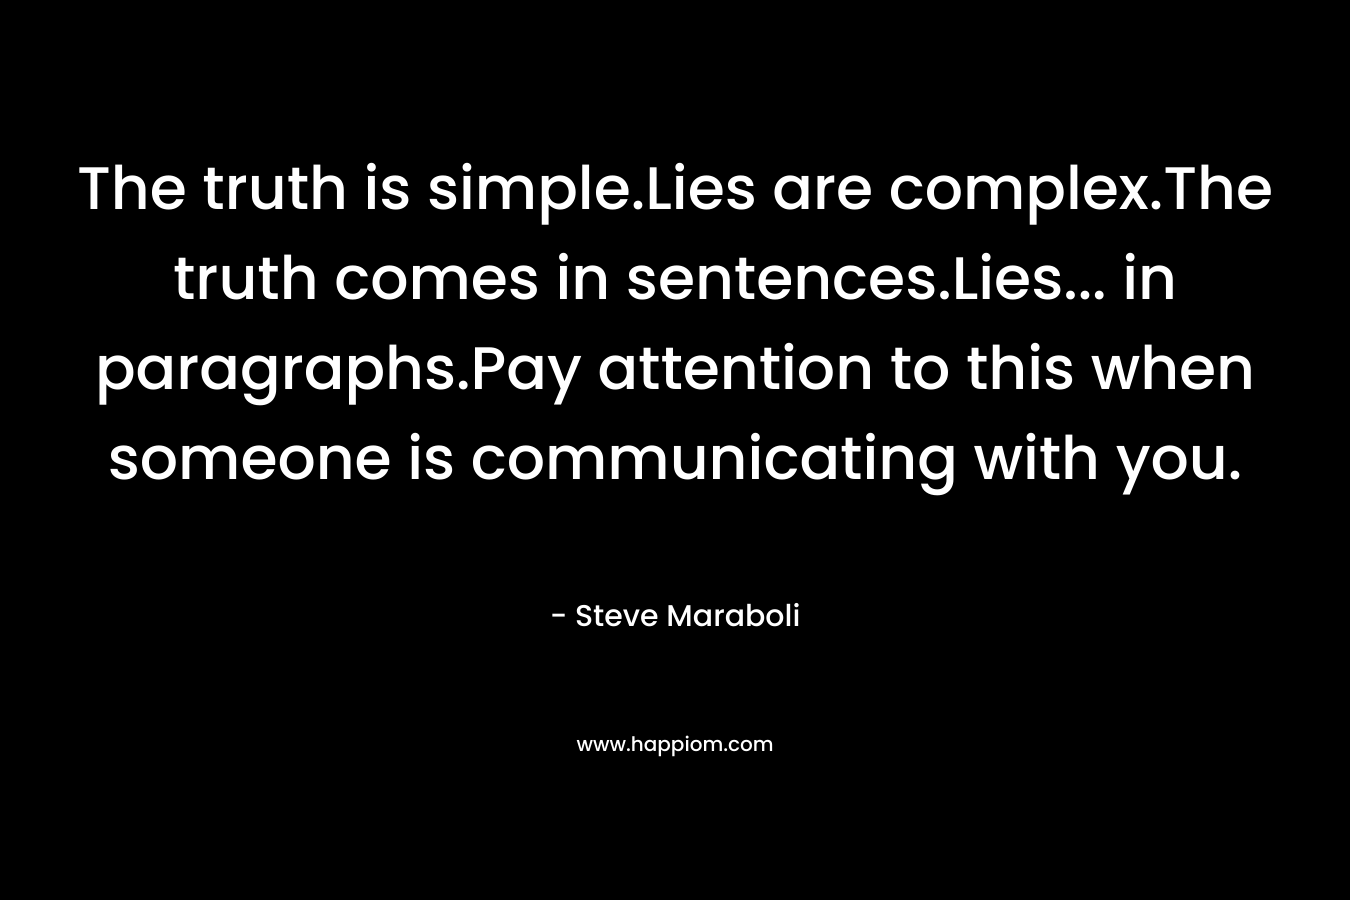 The truth is simple.Lies are complex.The truth comes in sentences.Lies... in paragraphs.Pay attention to this when someone is communicating with you.